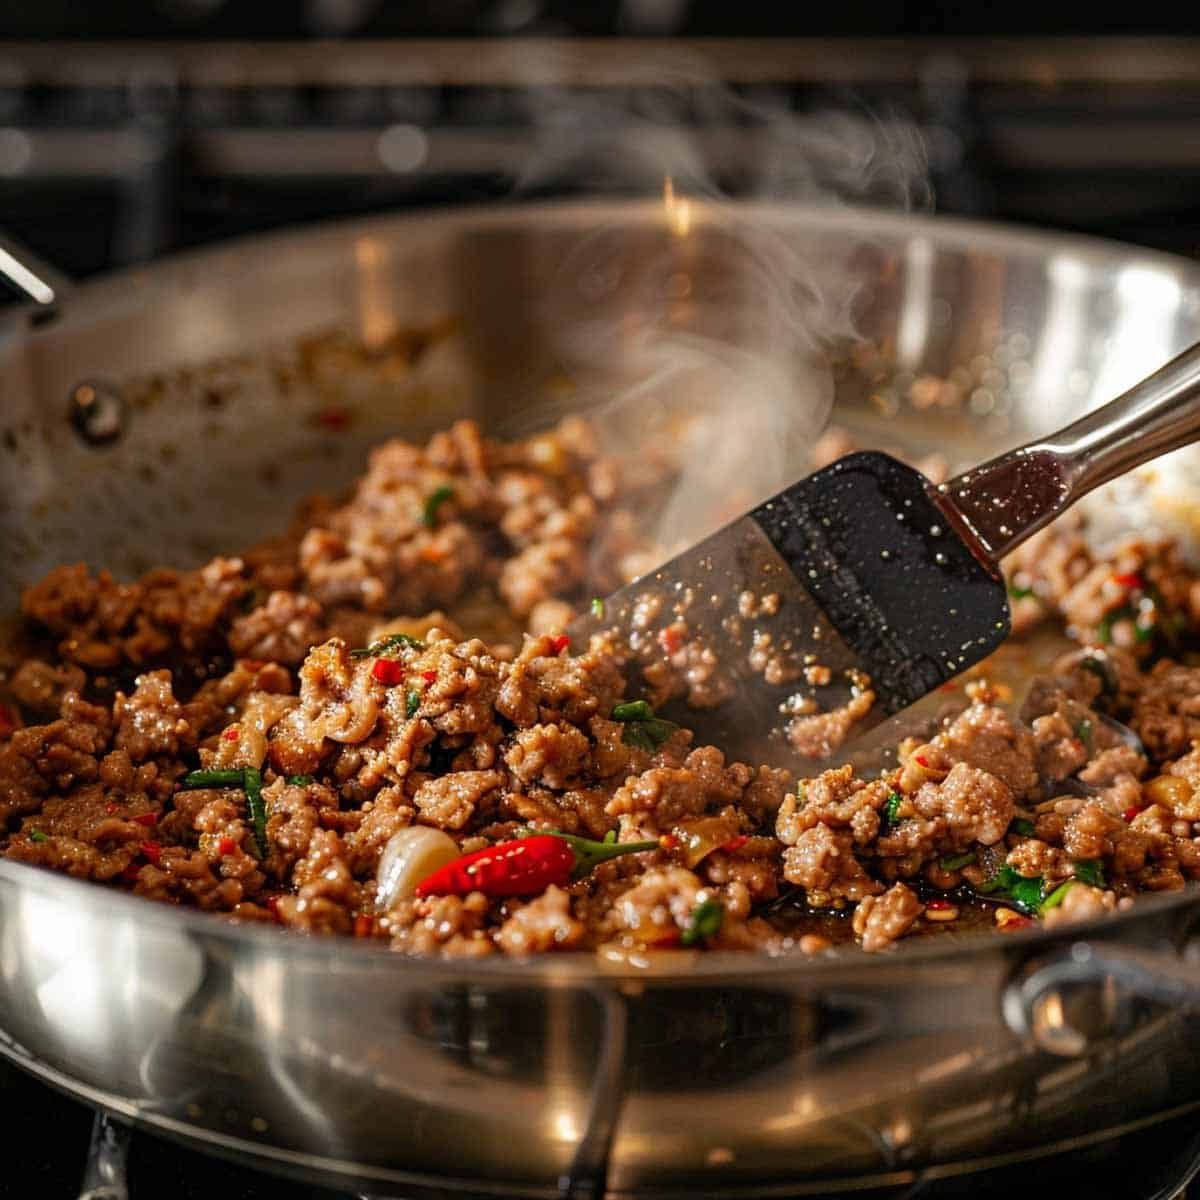 Ground pork and key ingredients for Thai Basil Pork recipe (Pad Kra Pao Moo) being cooked in a pan.